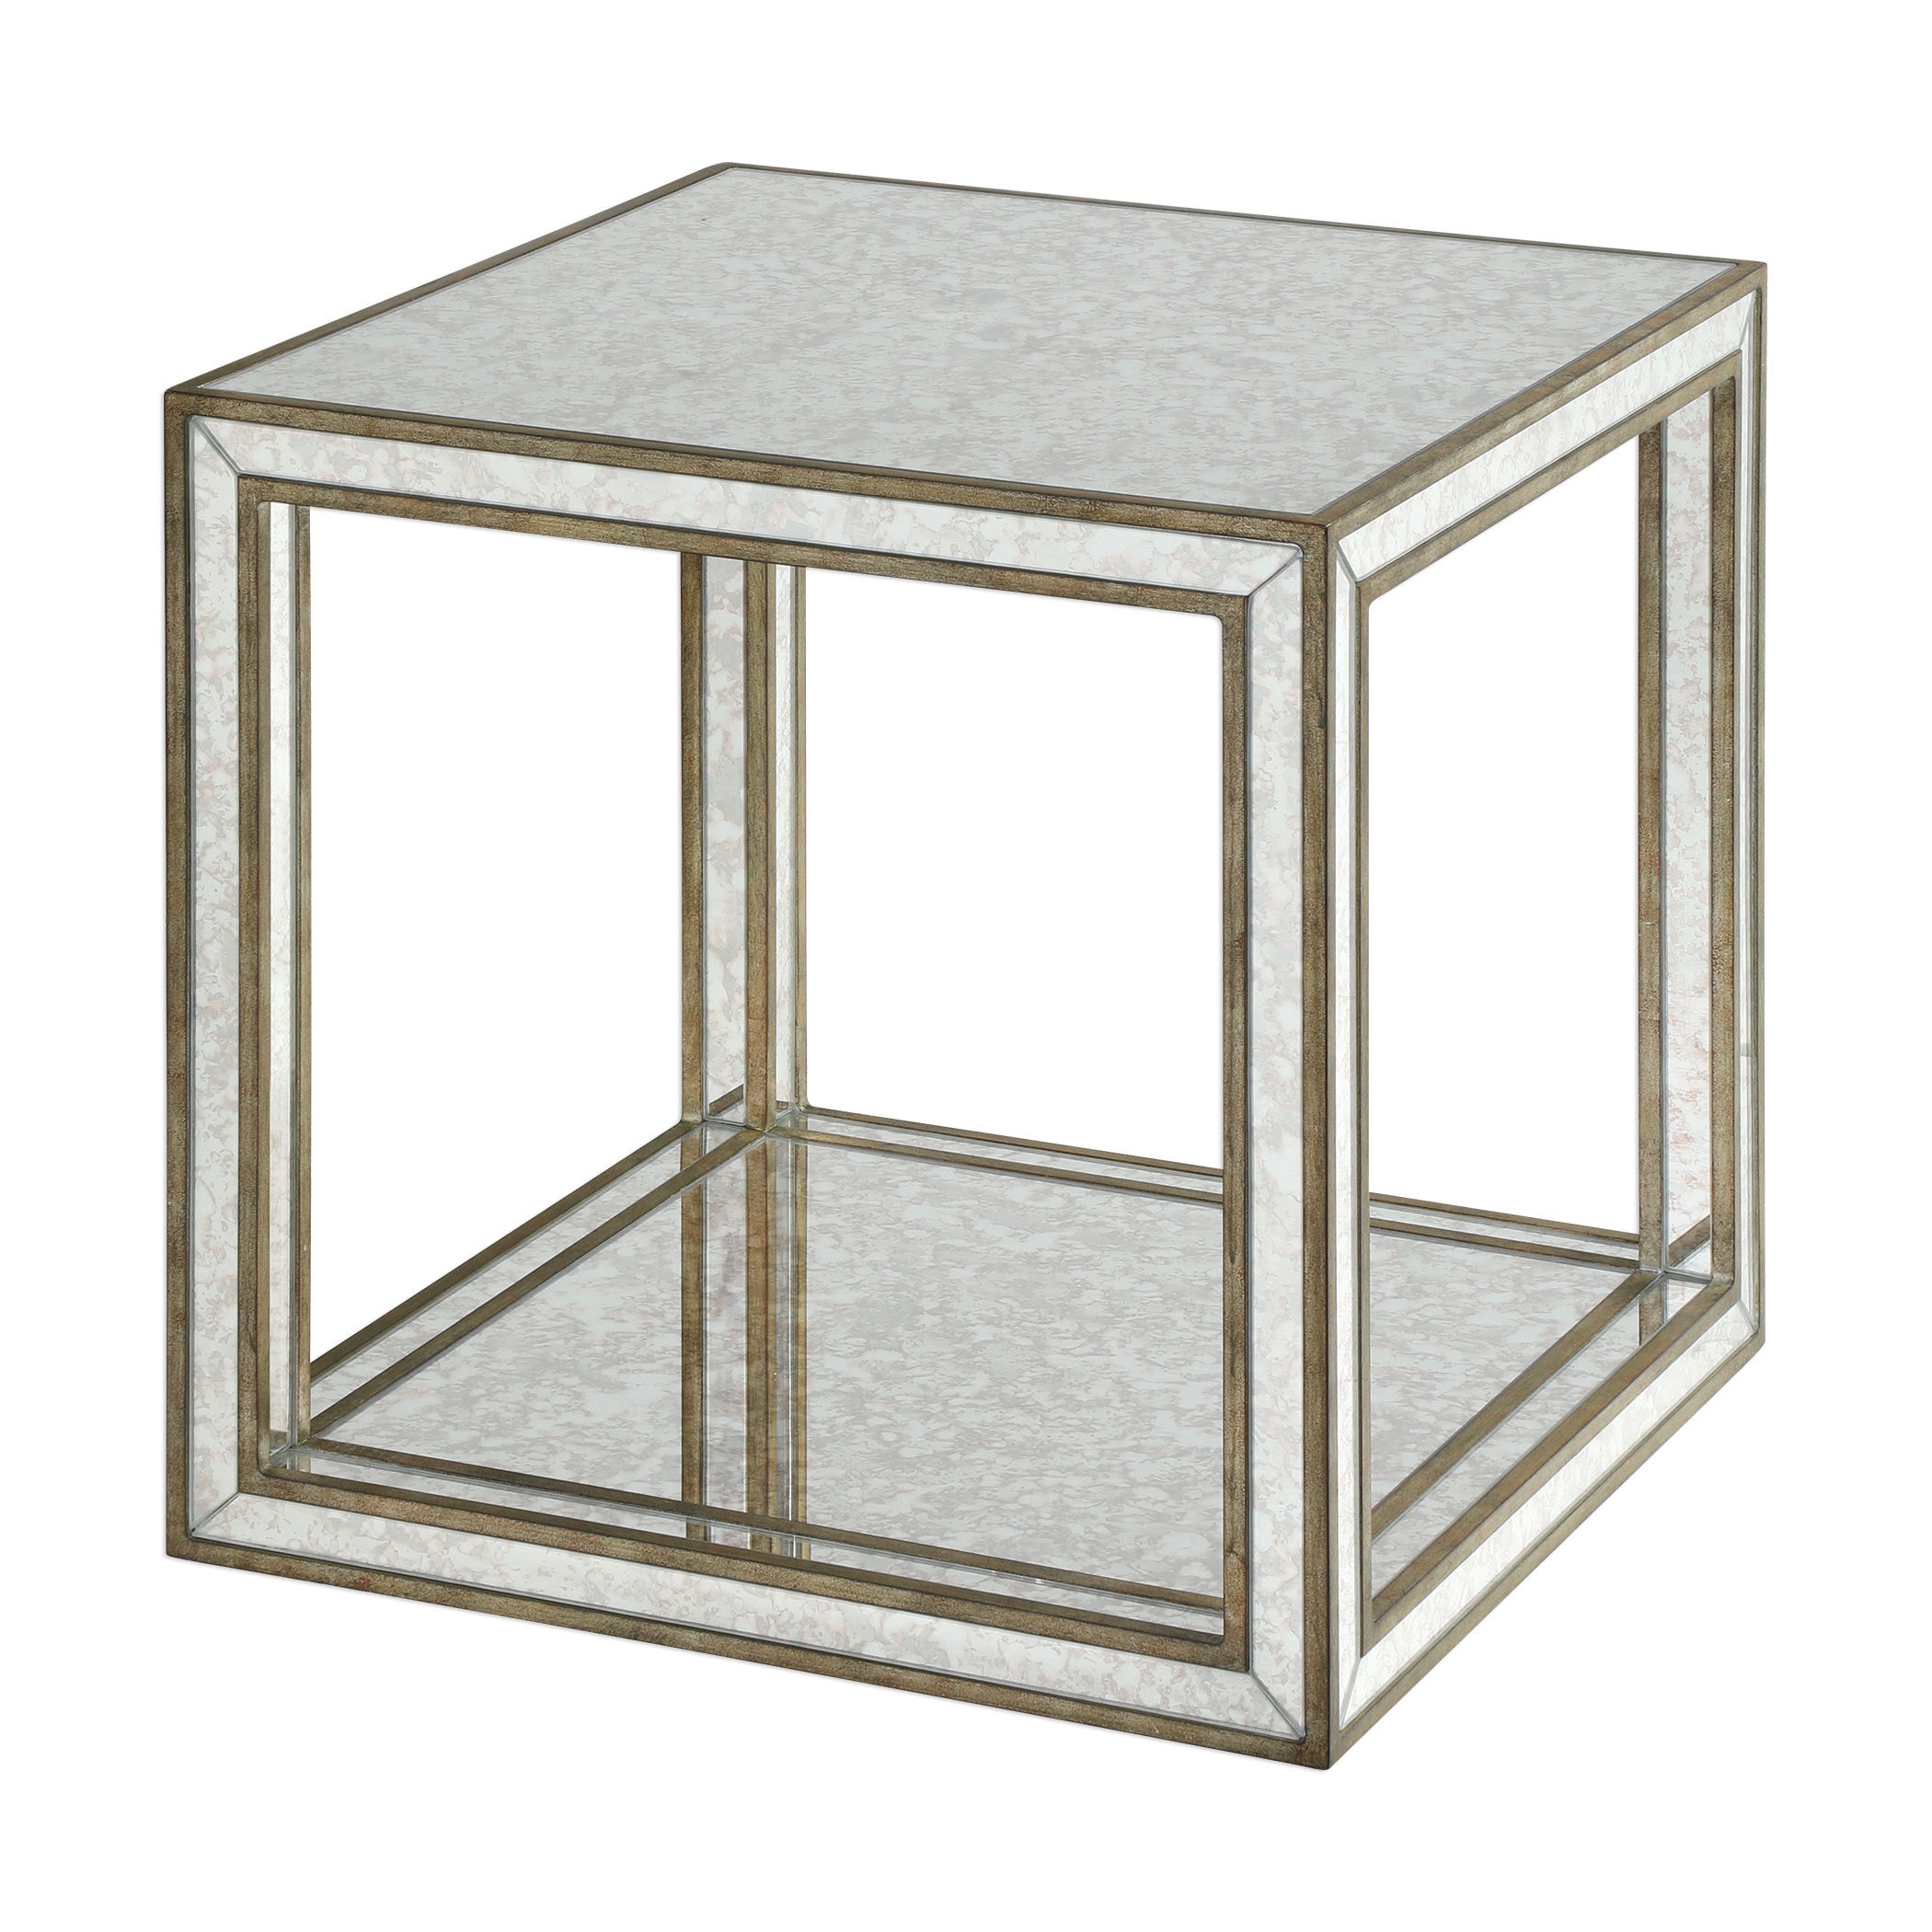 Featured image of post Mirrored End Table Cheap - Mirrored end table cheap sale, uttermost offers at kohls today.